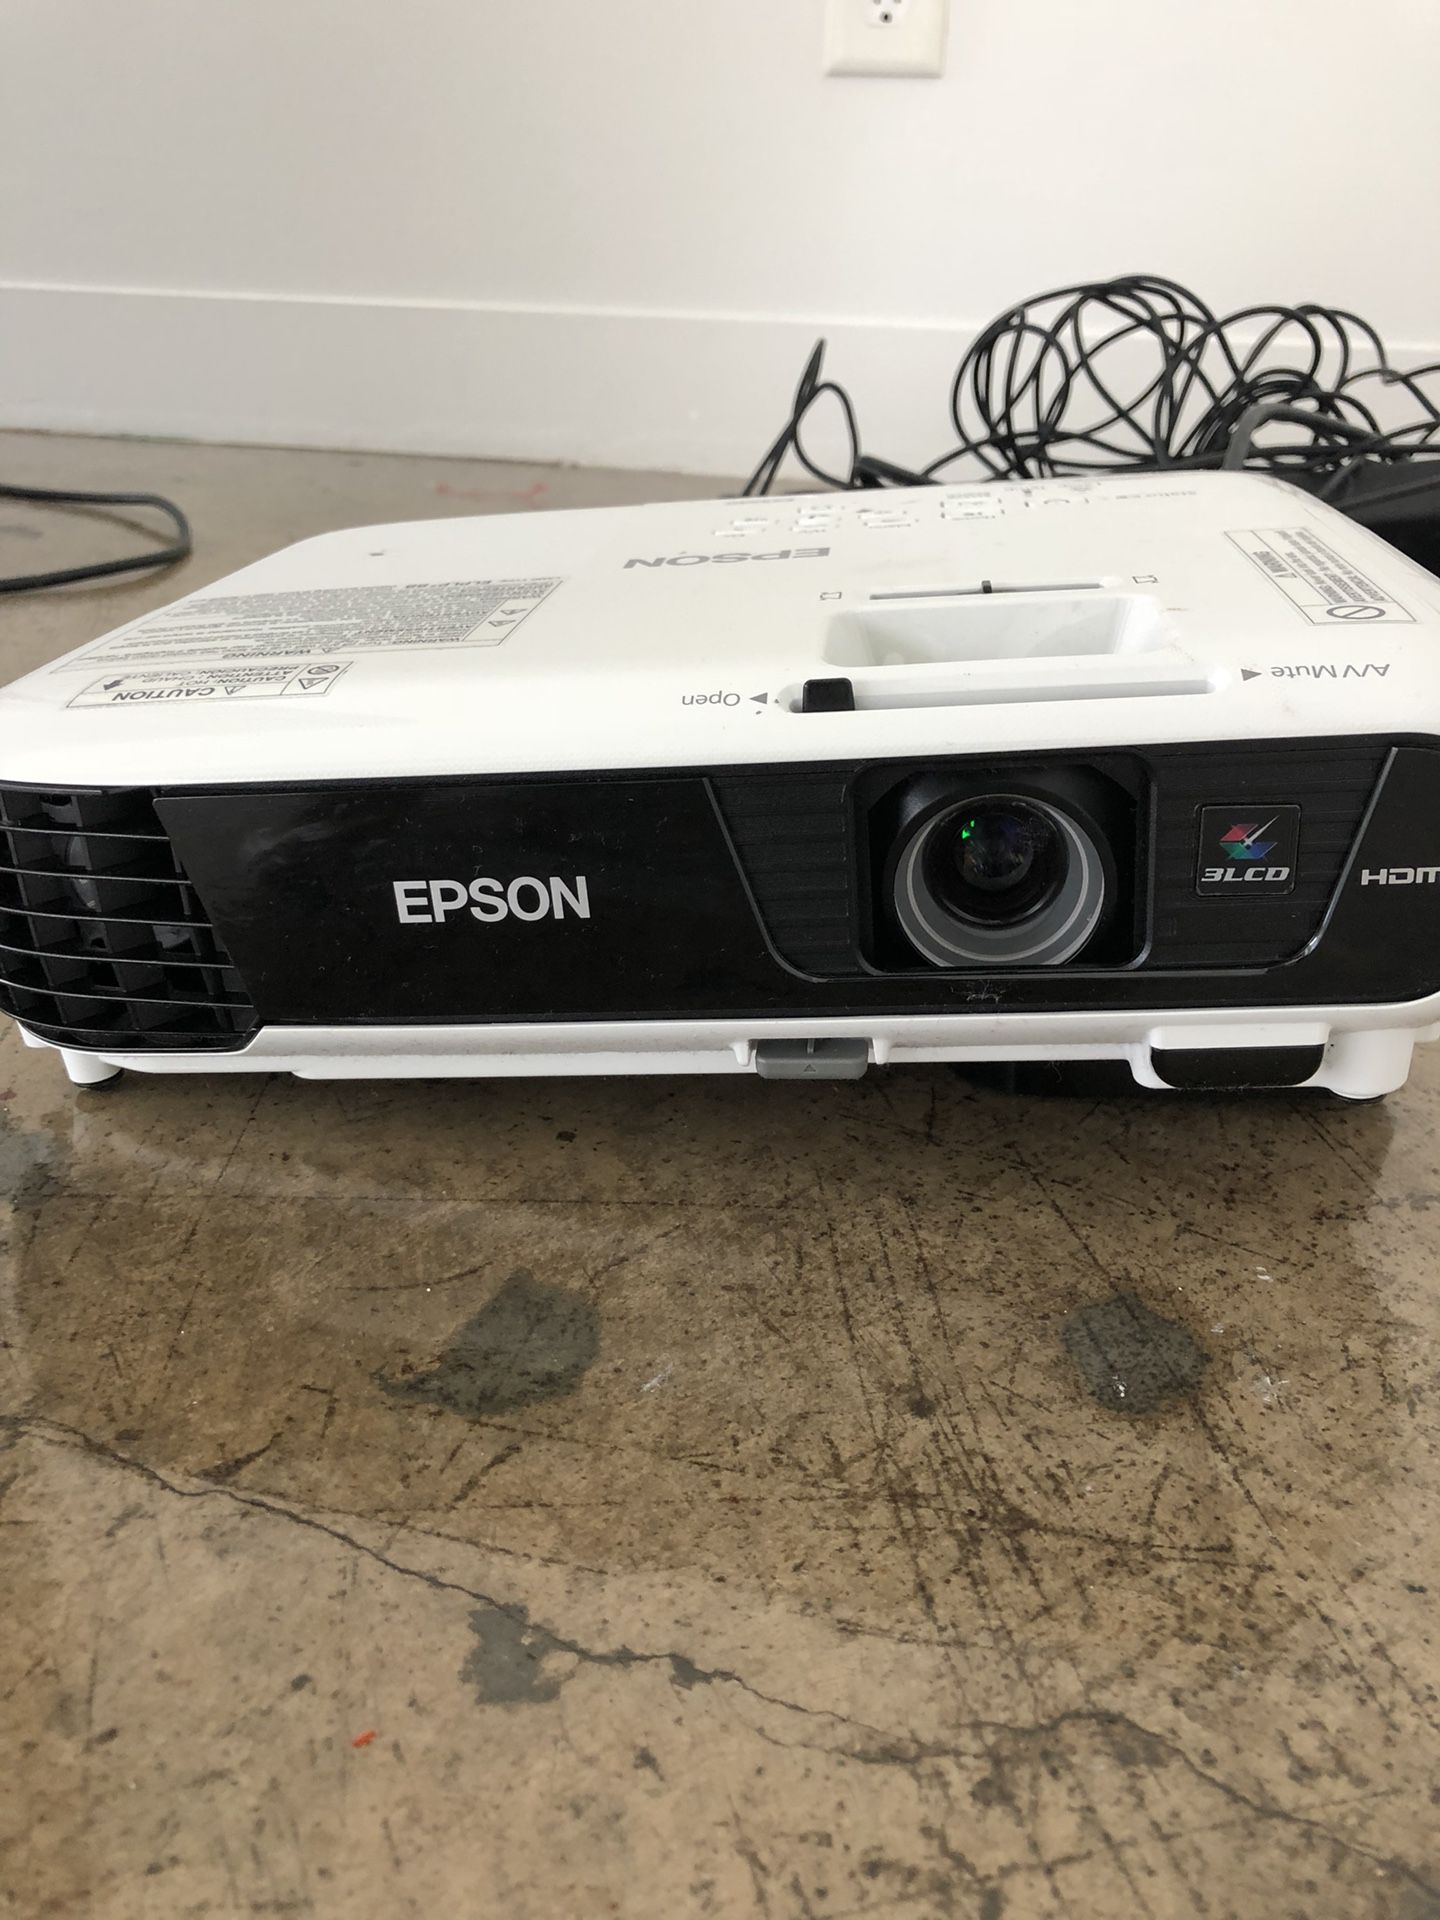 Epson EX5240 projector and Projector screen